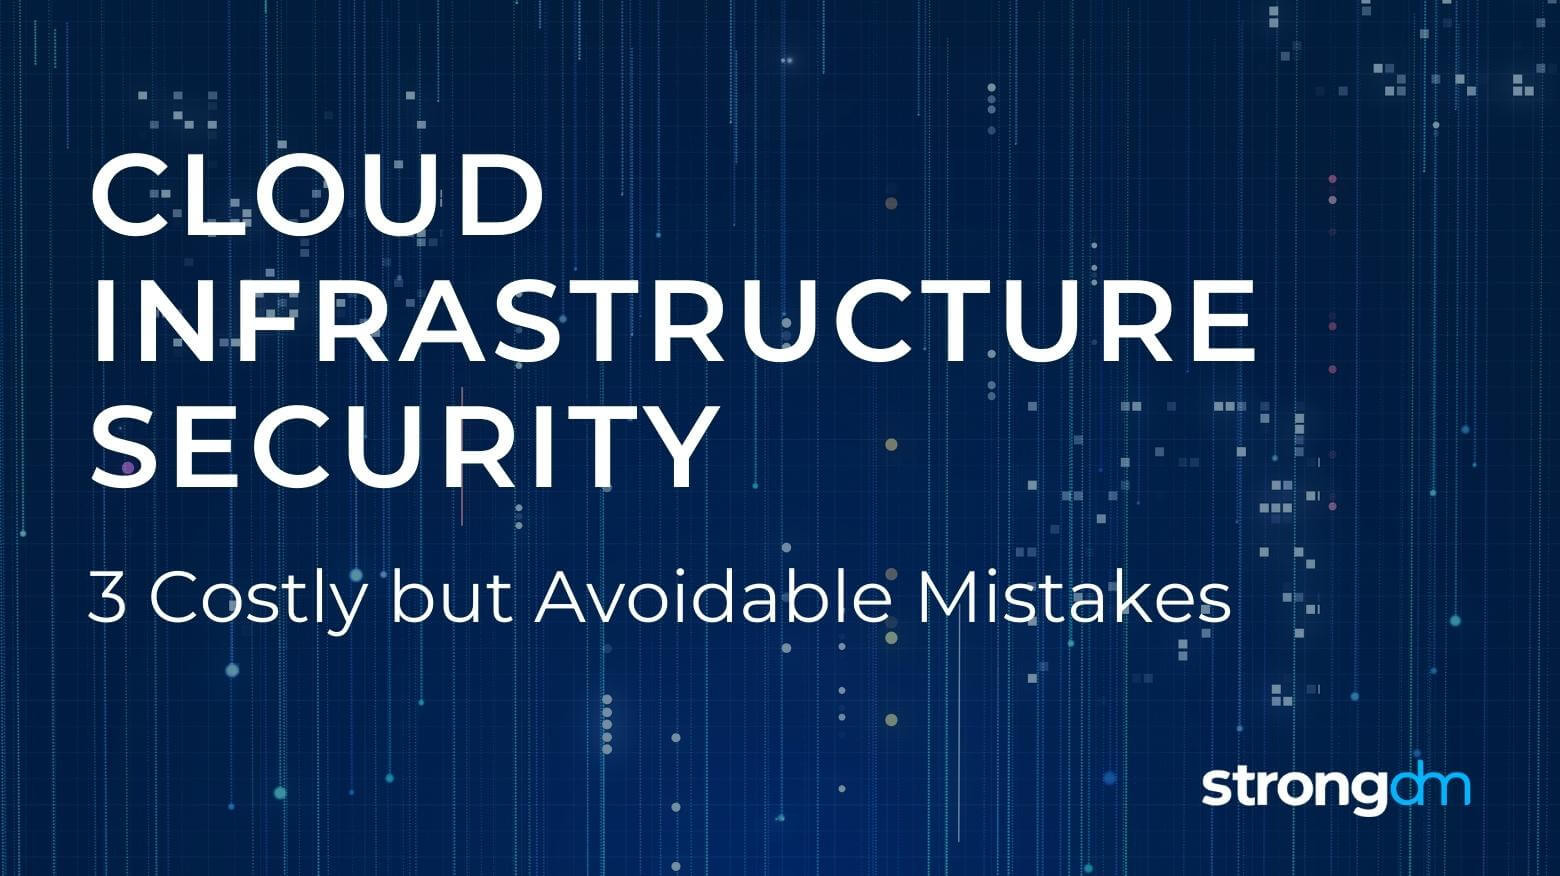 Cloud Infrastructure Security | 3 Costly but Avoidable Mistakes